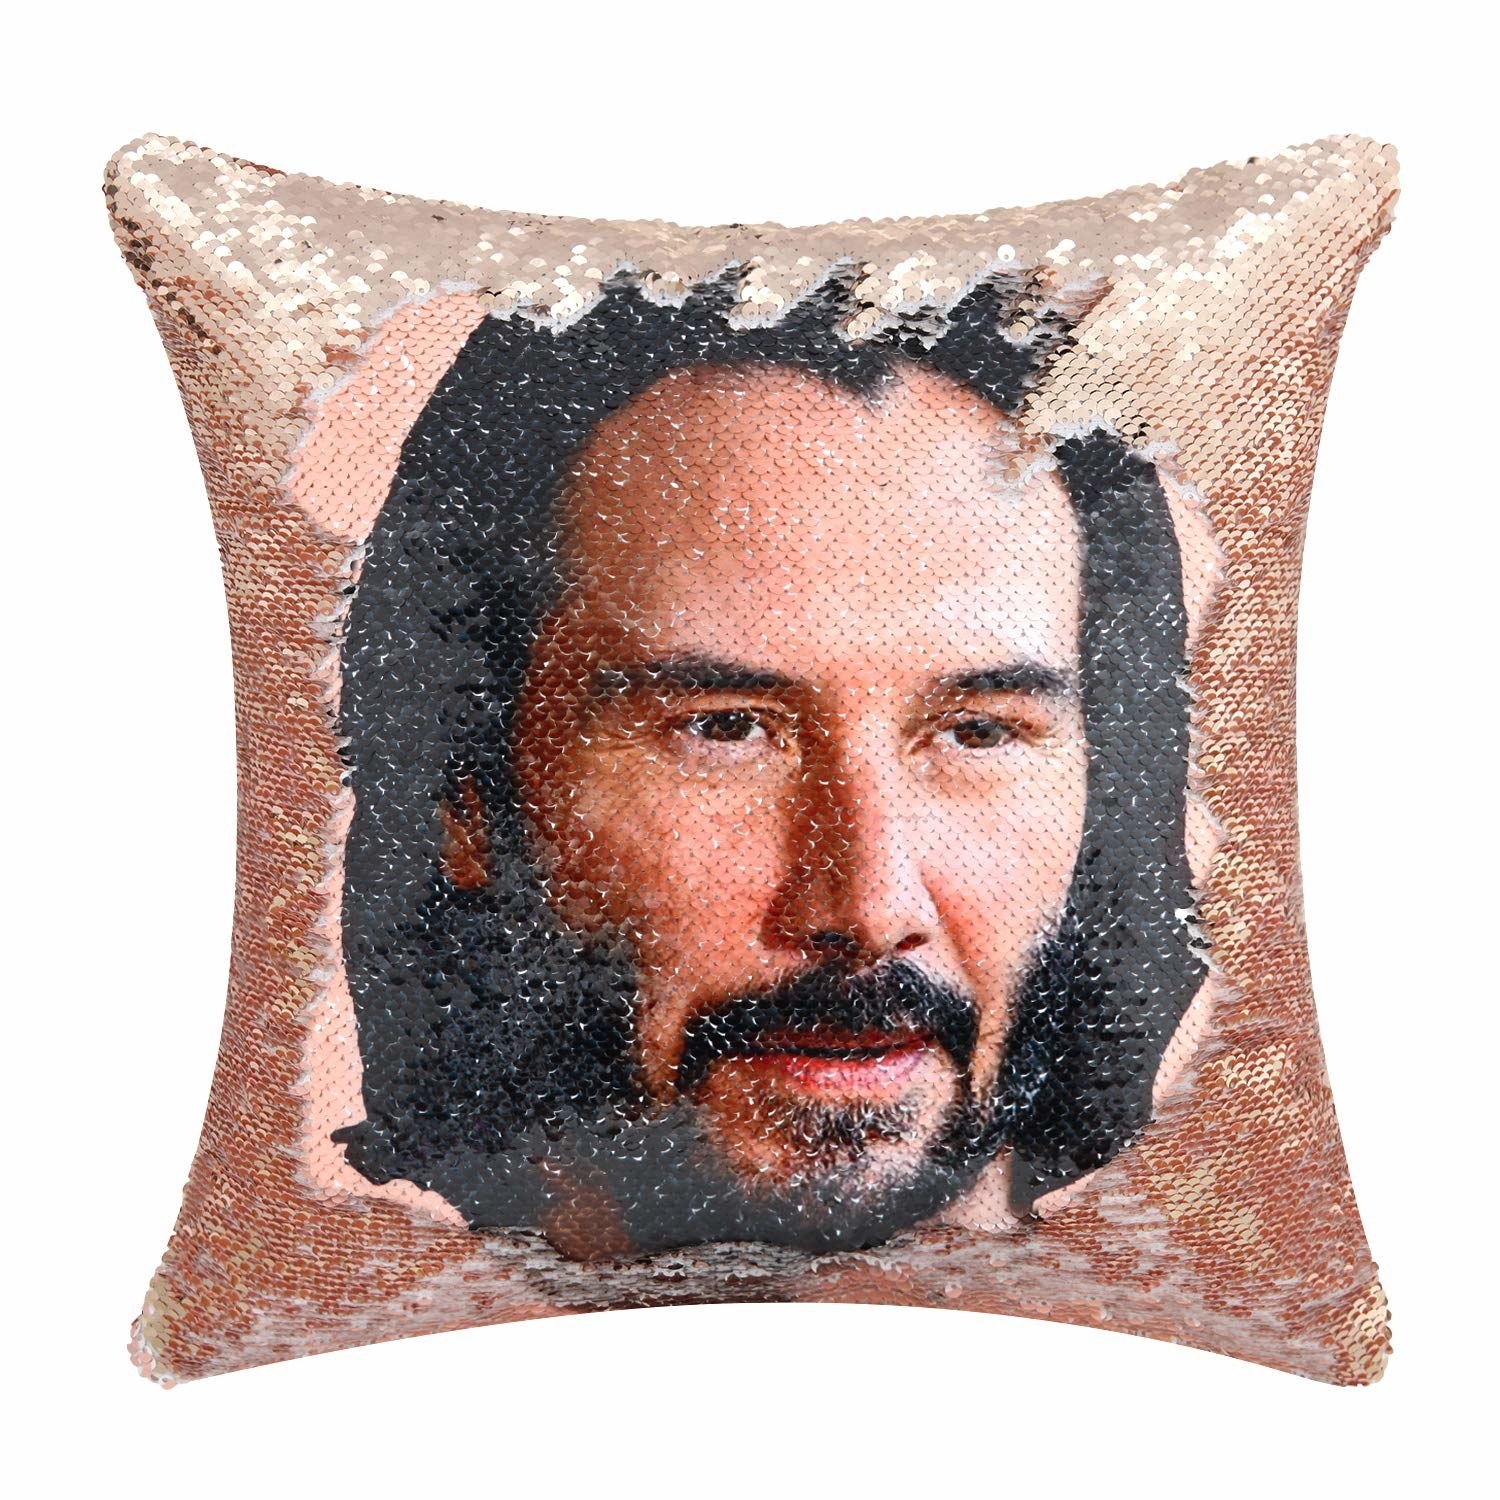 The sequin pillow hiding a picture of Keanu Reeves